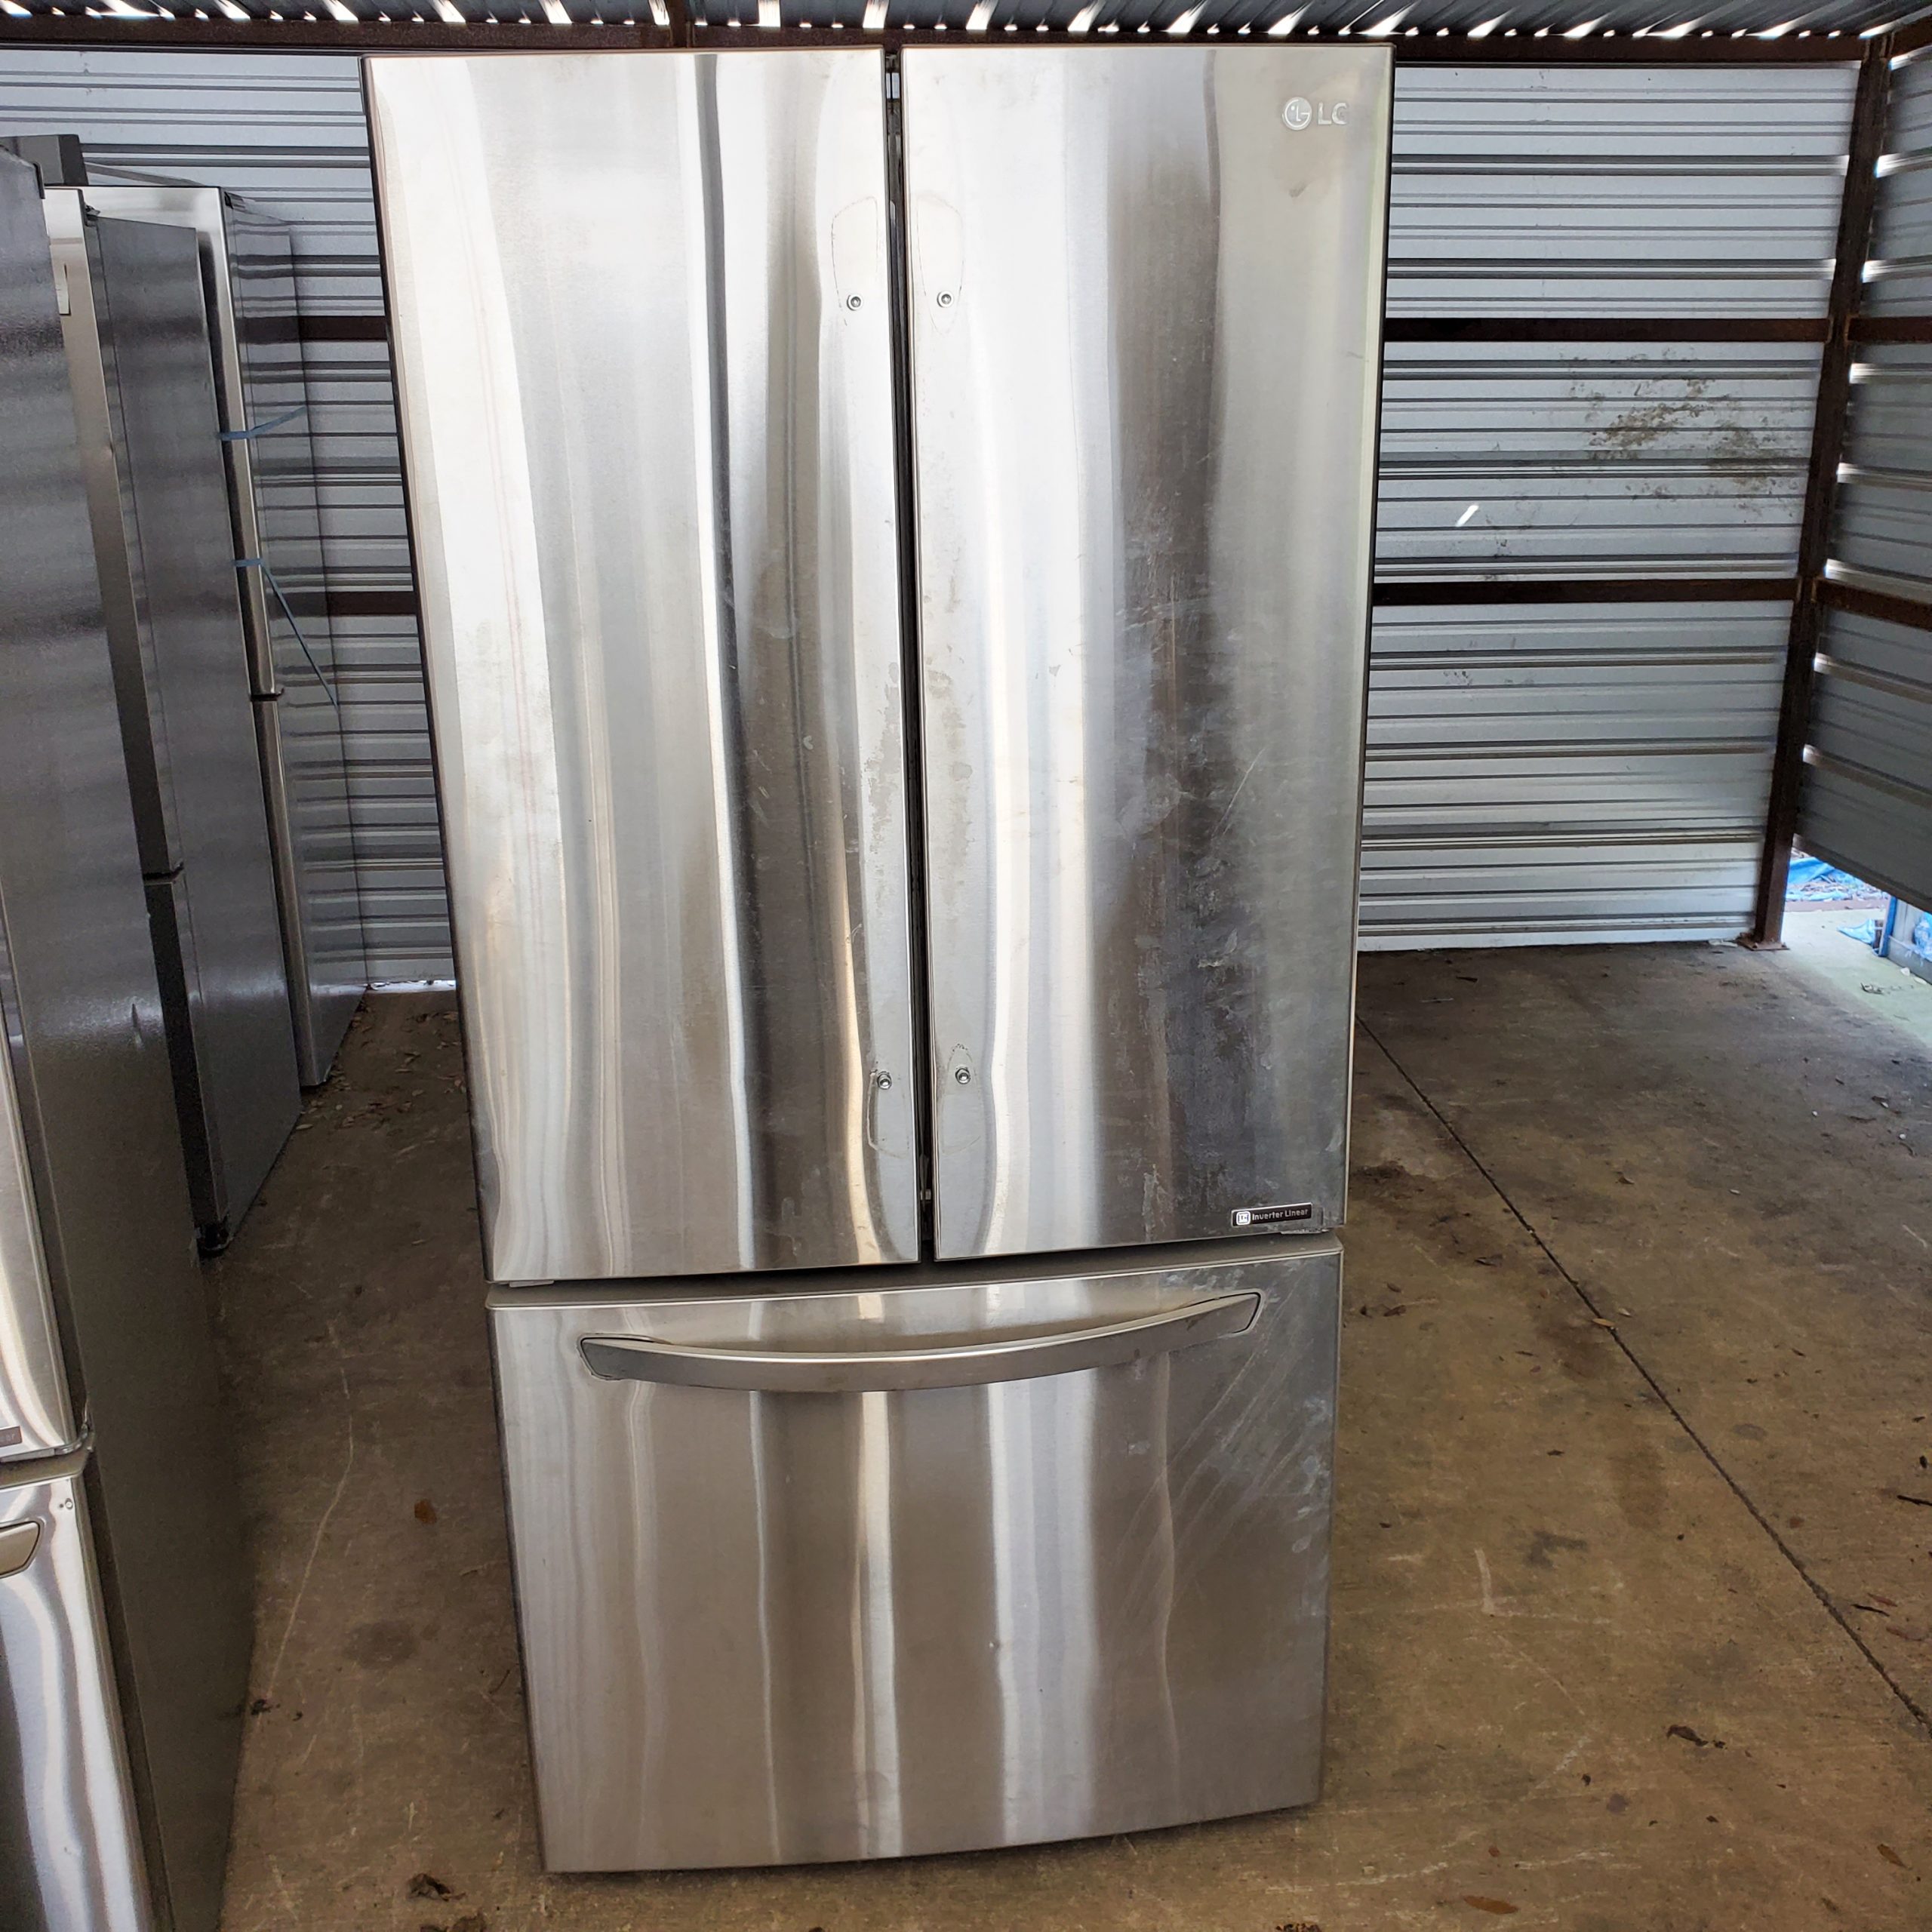 example of LG Salvage Stainless Steel French door refrigerator that was recently sold in our salvage wholesale program.